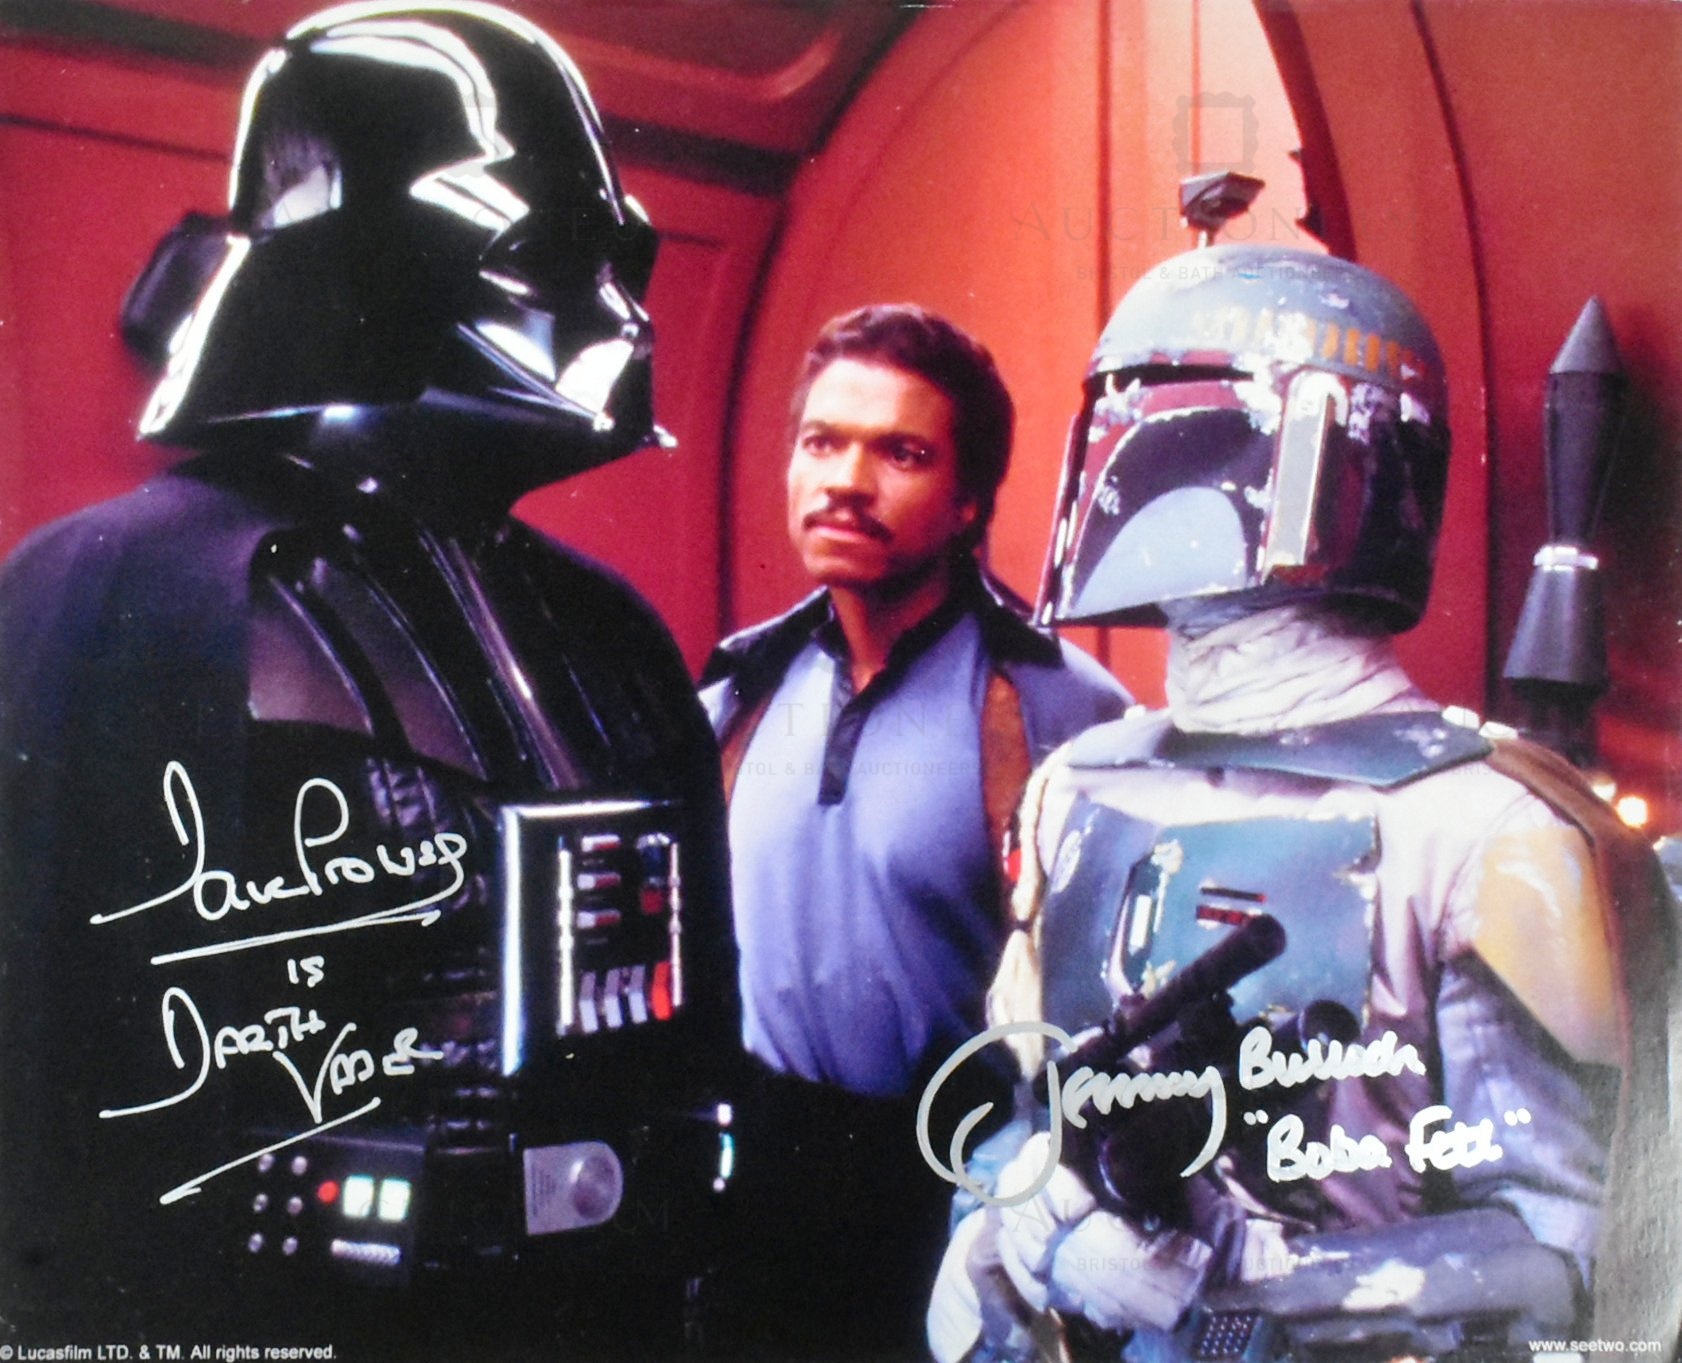 ESTATE OF DAVE PROWSE - VADER & FETT DUAL SIGNED PHOTOGRAPH